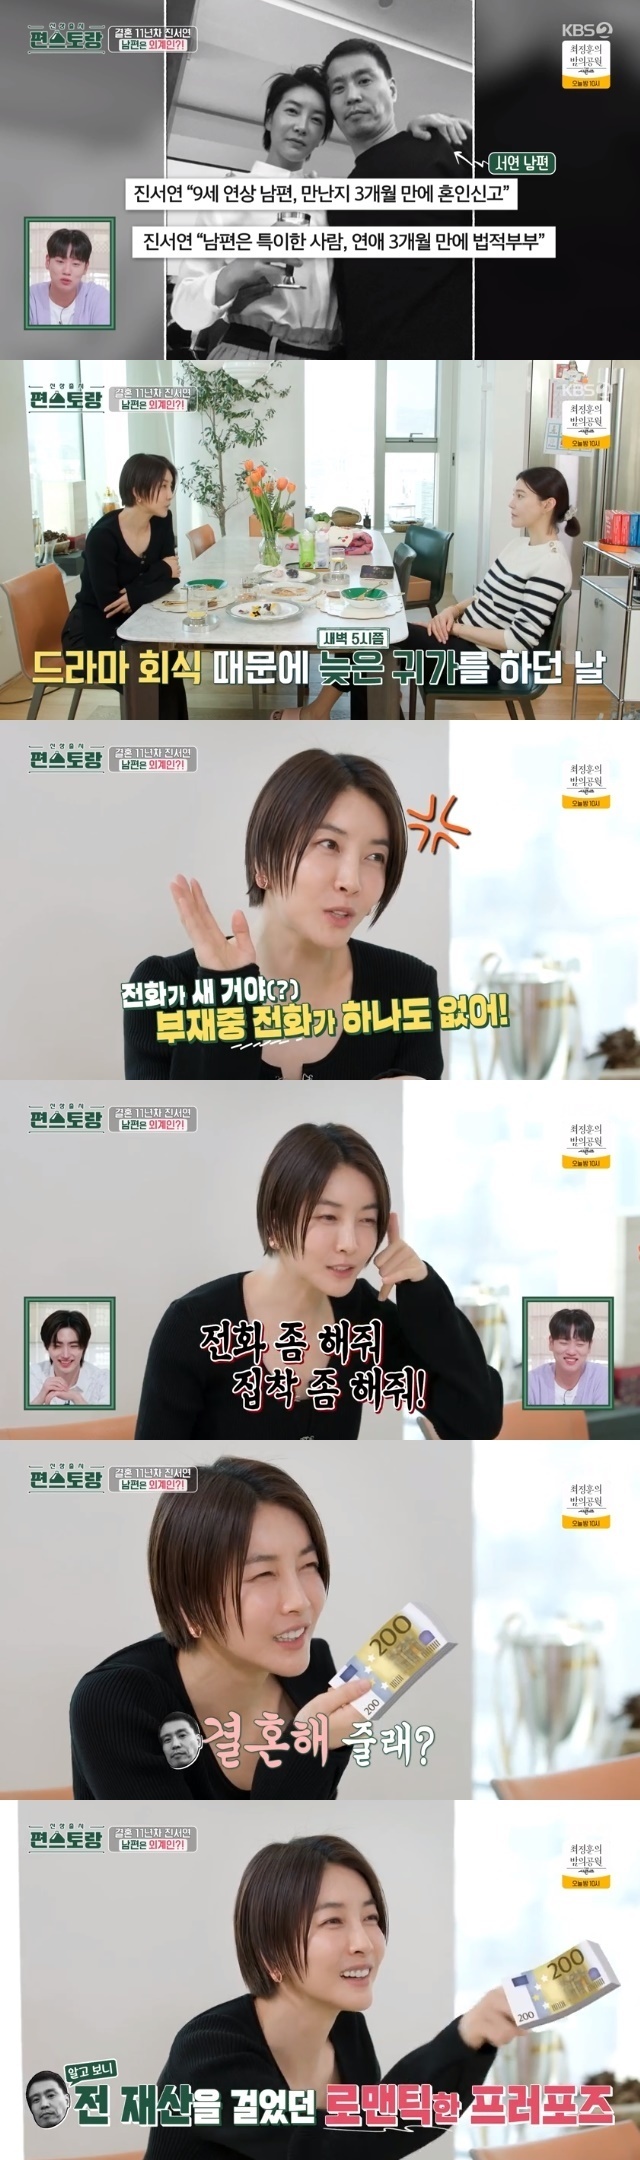 Actress Jin Seo-yeon has revealed an anecdote about her love affair with Husband.In the 181st episode of KBS 2TVs entertainment show Stars Top Recipe at Fun-Staurant (hereinafter referred to as Stars Top Recipe at Fun-Staurant), which aired on June 23, Cha Ye-ryun invited actor Jin Seo-yeon to his home.On this day, Cha Ye-ryun introduced Jin Seo-yeons house visit, saying, My sisters hobby is yoga, a vegetarian who does not eat meat.For Jin Seo-yeon, who is so thorough in body care, Cha Ye-ryun makes flower spring rolls with edible flowers instead of meat, rice balls with no rice balls, and soybean cream potato gnocchi made with tofu and milk The Speech.Jin Seo-yeon, who came to Cha Ye-ryuns house with a unique Sen Sister force, gave a noir atmosphere and said to Cha Ye-ryuns house view, Is this an affluent taste? Is this a successful life?Cha Ye-ryuns Ill take your clothes, Ill take your clothes, he said.Cha Ye-ryun said, When I first read the whole script, it was the most trembling day. I said Hello! (brightly) and said, Oh, whats that?On the first day, I had a simple dinner, and I became acquainted with saying, I think you are the funniest person in the world. Cha Ye-ryuns The Speech meal satisfied the five senses of Jin Seo-yeon, who said, No matter how much you eat, you do not get fat.I really like to eat, but everything I sell outside is fattening. Thanks to Cha Ye-ryuns heart and sincerity, Jin Seo-yeon said, I have food.If the job was not an actor, it would have been 90kg, 100kg. In particular, Jin Seo-yeon said that his Husband is a very independent person. I had a drama dinner and did not go in until 5 am.Of course, I thought, There must have been a lot of Telephones, but the Telephone was new. I did not have any Telephone in my absence. I was so upset that I did not get a Telephone.The second time, I fell into a deep sleep and said, Oh, my god. I said, Its 5 oclock in the morning. I do not have a phone. Im not worried about my wifes accident outside.I am an adult living in society, and I respect you.I was so angry that I went home and said, Brother, I like to peck a little. Give me a Telephone. Give me an obsession.I do not respect the person Im with on the phone. However, Ryu Soo-young praised the affluent relationship as healthy .Jin Seo-yeons Husband story continued, I met at a cafe because I decided to stay with my brother No Strings Attached before I first started dating.I did not know the identity of this brother. My ideal type was a man who spoke a lot of foreign languages and was a free thinking and smart man, but that was exactly what I did not see.I didnt see an alien, he said.Im free, but Im too free, Jin Seo-yeon said in Husbands alien anecdote. I had some euros that I had saved up for a long time in Paris, Europe. I took some money from somewhere and said, Will you marry me?I shook my money on my nose and said, Will you marry me because its all my property?Jin Seo-yeon said, This Husband is so funny. Its our 11th year of Husband. Usually, if you live a long time, you dont like it even if you breathe. Its so funny just to feel the energy passing by. Its not Lovely, its Arent you crazy?Its funny just to see him sleeping. Its like a cartoon character. I say to Wapa, Only tears, did you tear the cartoon? He acts like he would in a cartoon. Lee Chan-won envied Jin Seo-yeon as an ideal marriage.